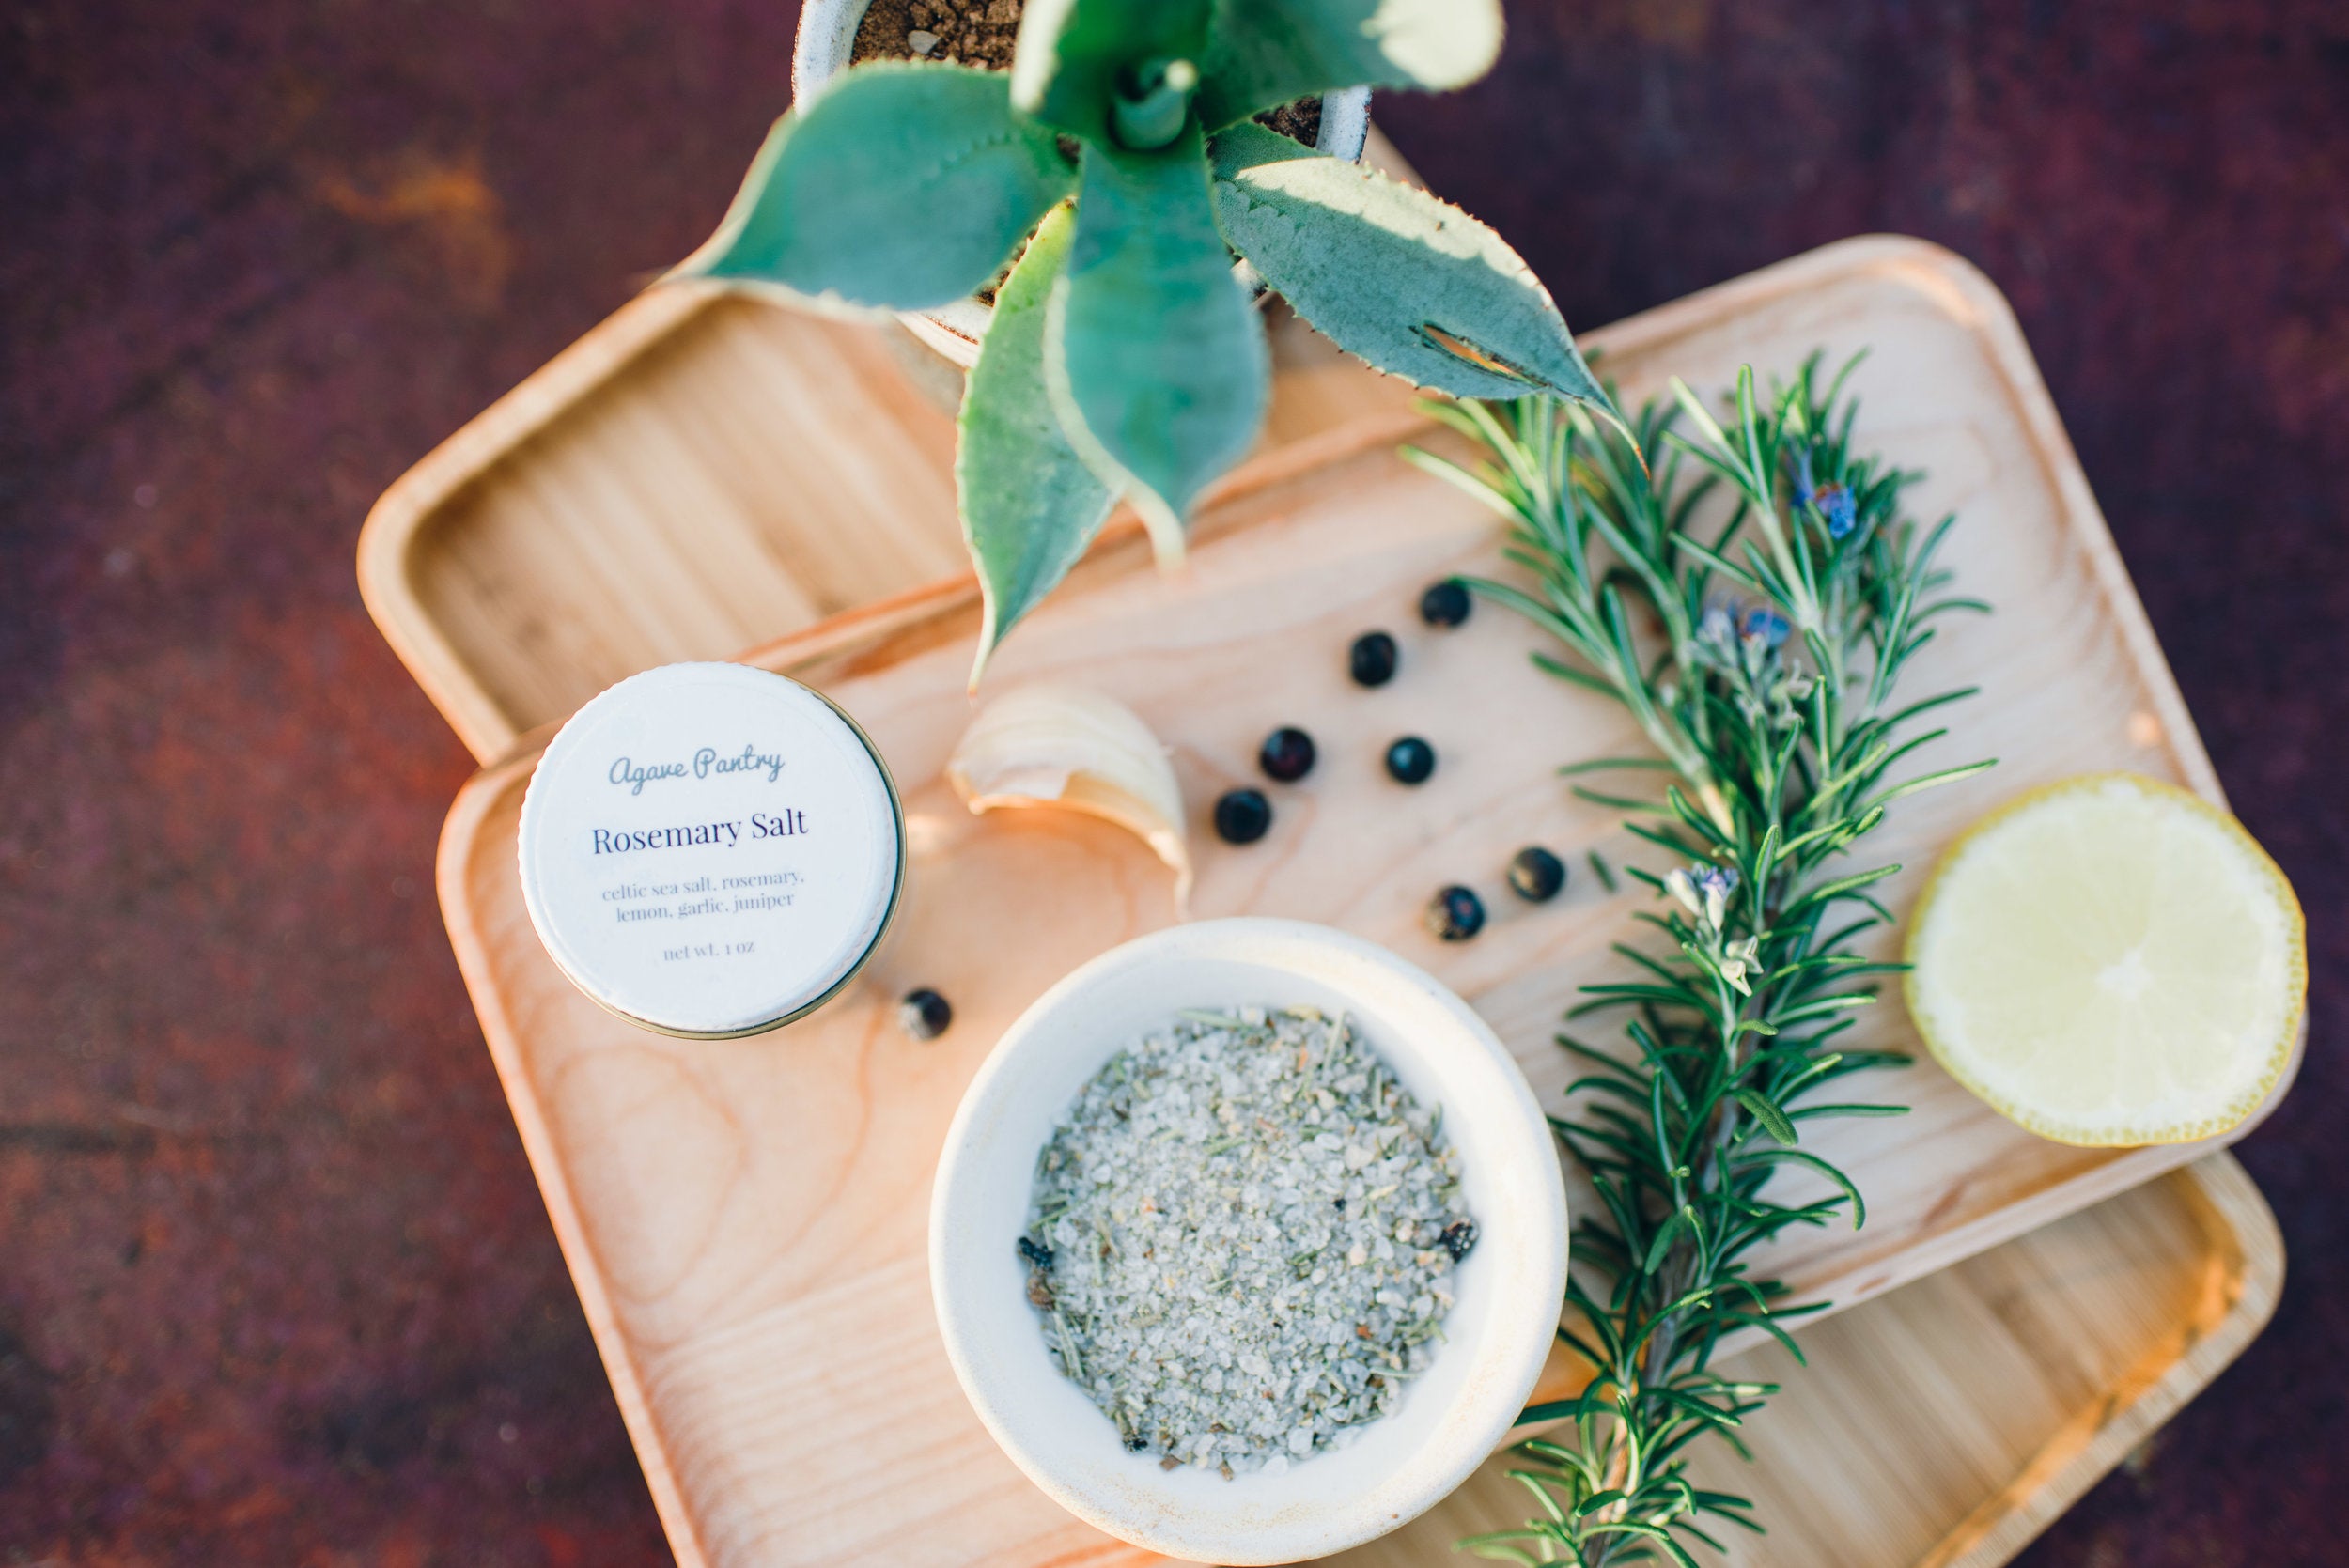 Light wood tray with rosemary salt in a jar and in a bowl next to a spice of lemon and a sprig of rosemary